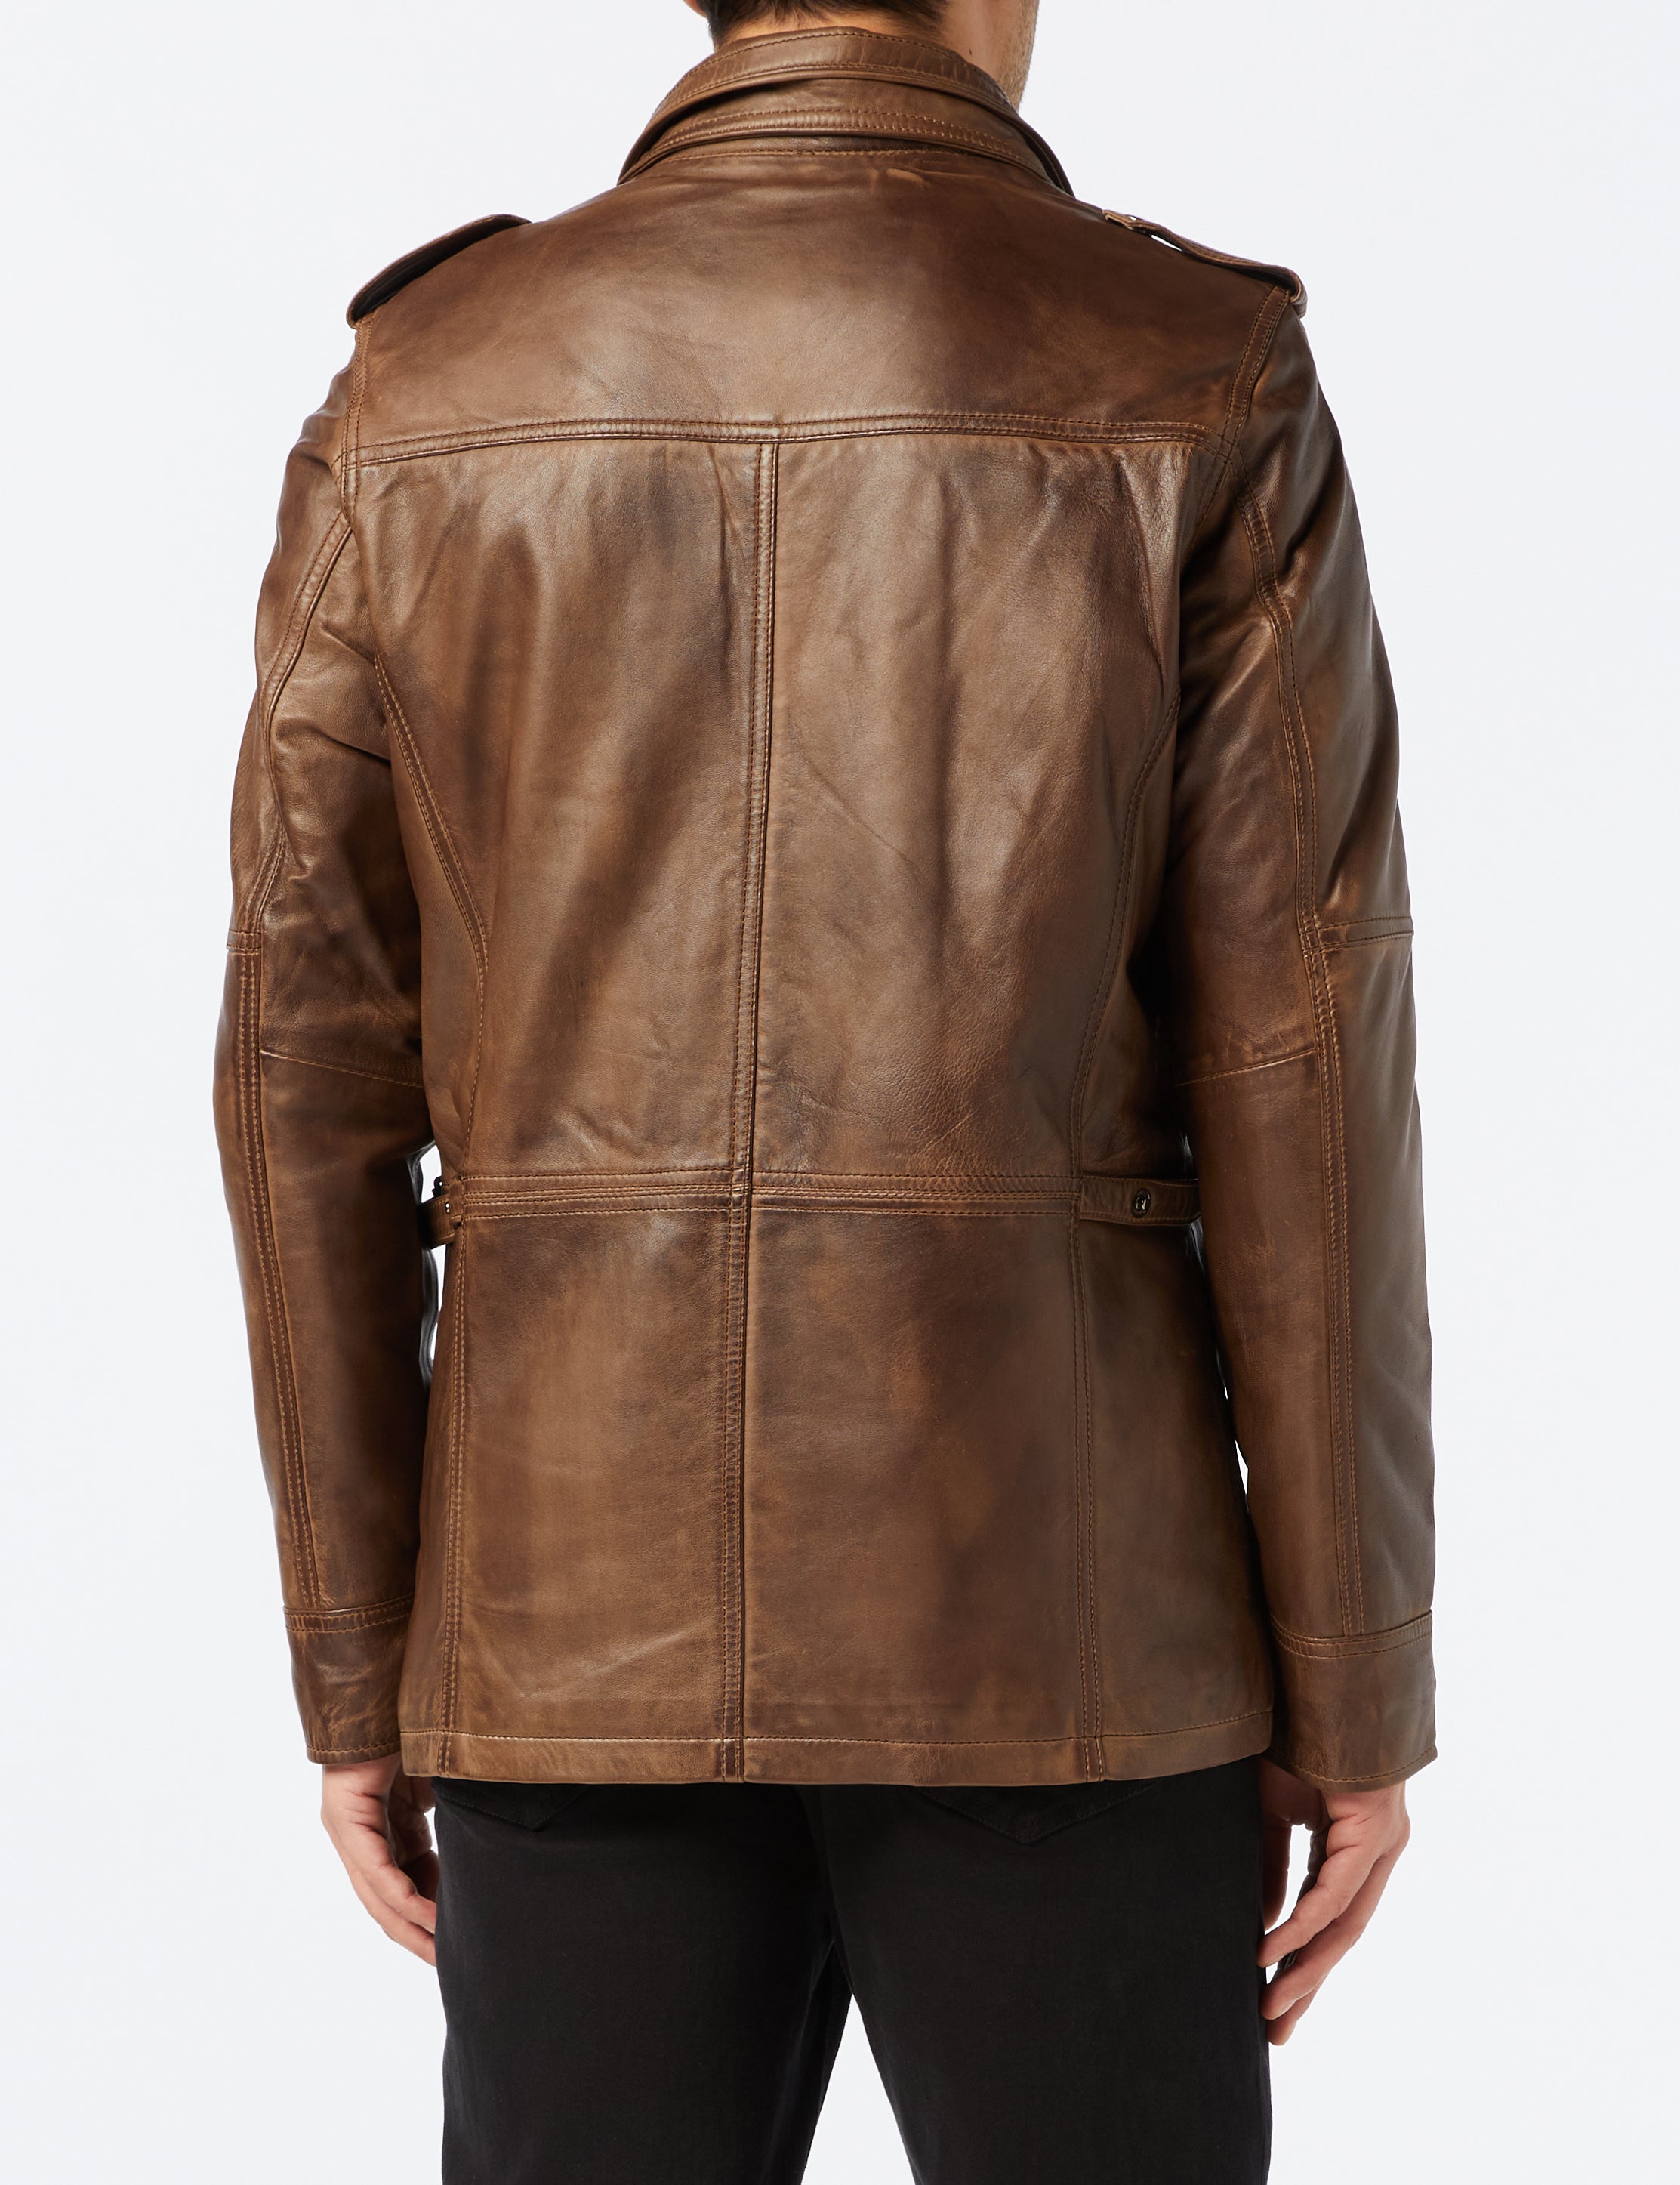 MILITARY STYLE BROWN LEATHER JACKET